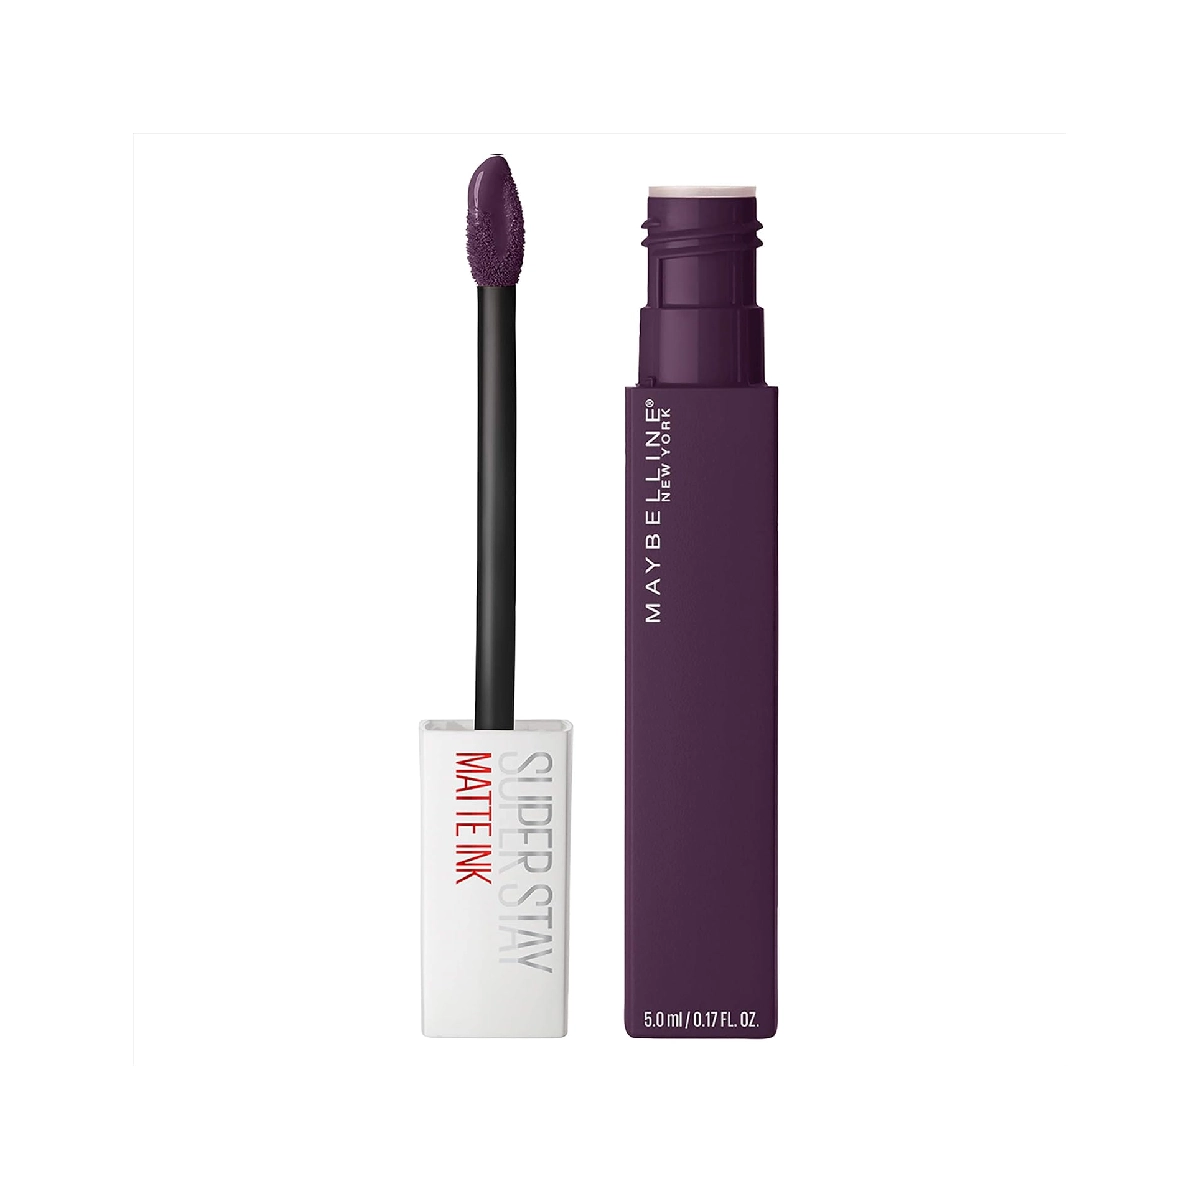 Maybelline SuperStay Matte Ink Liquid Lipstick - long-wearing lipstick in various shades